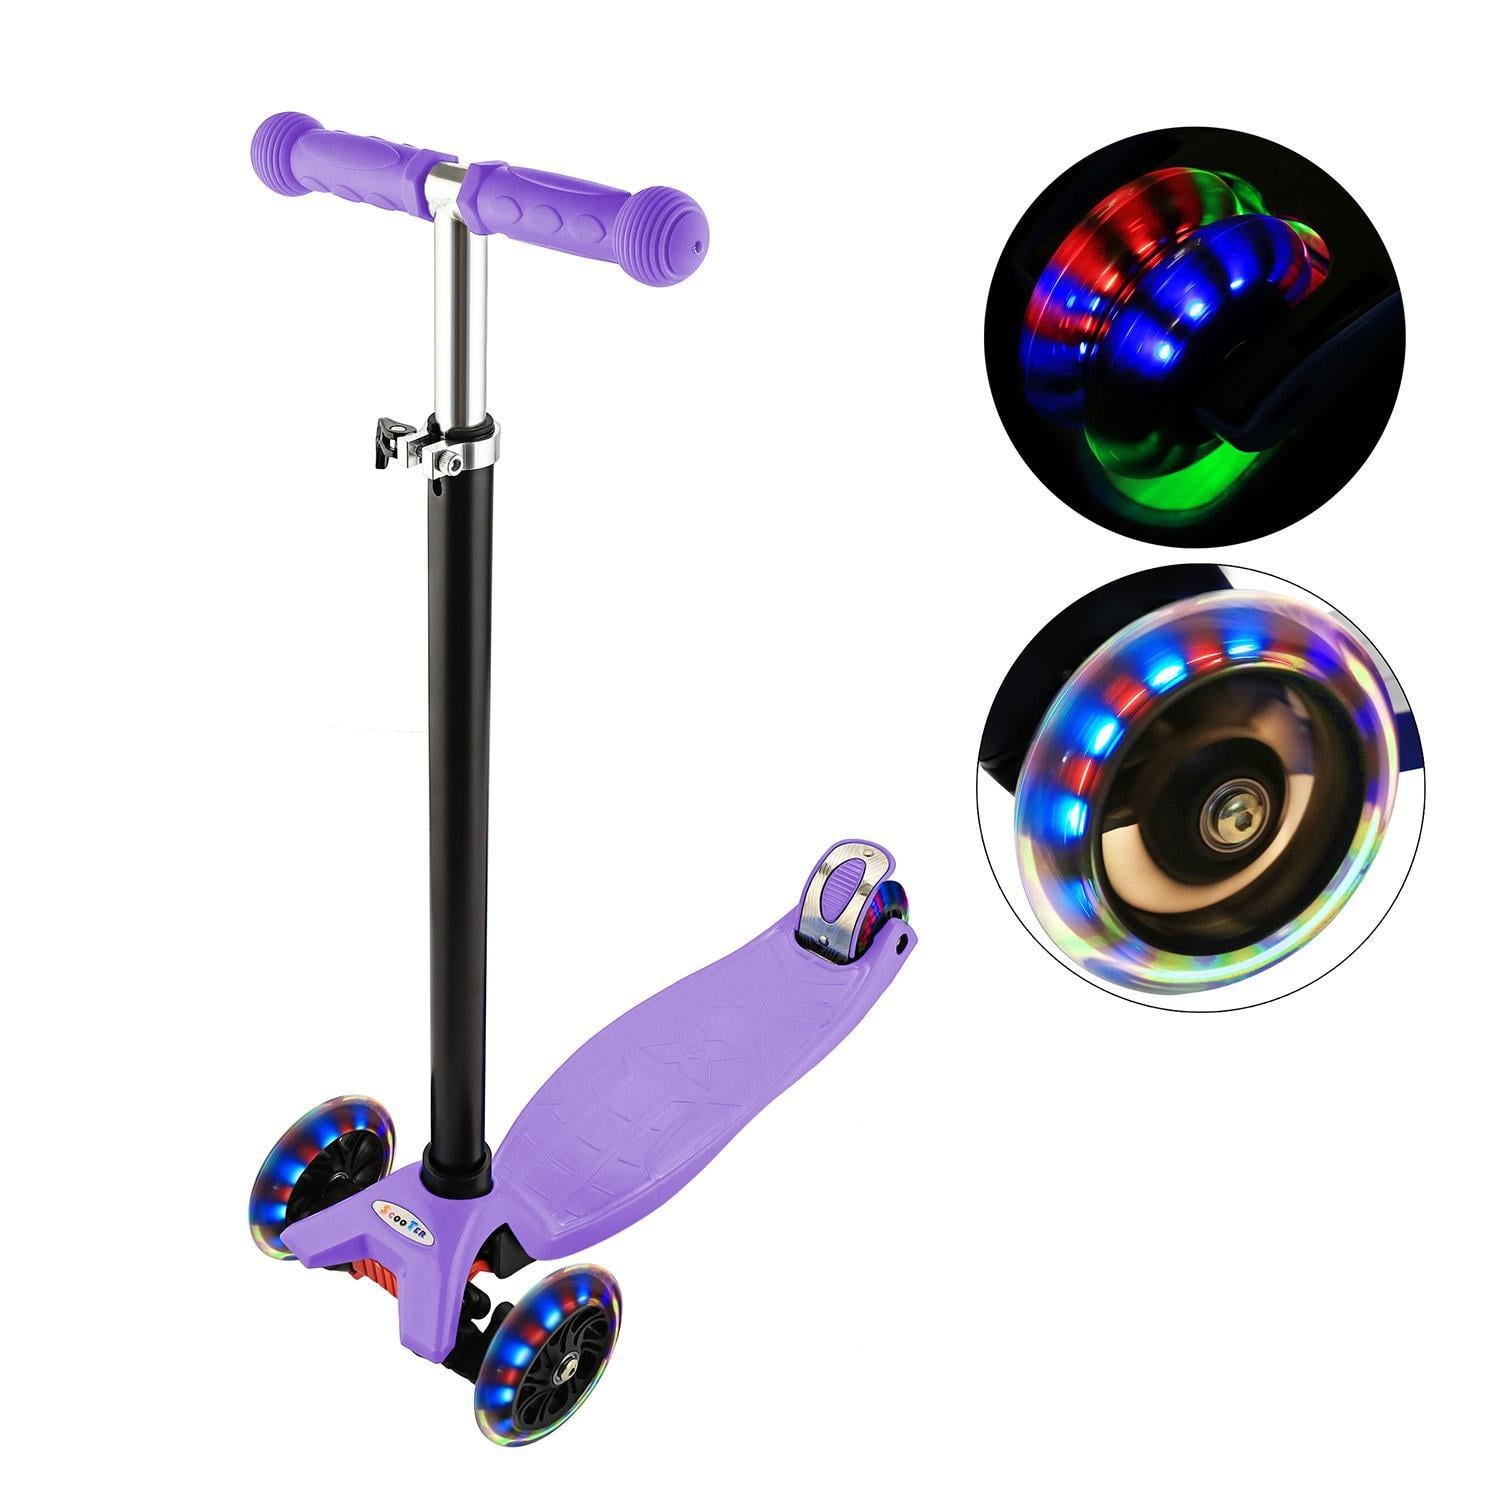 3 Wheel Kick Scooter 4 Adjustable Height T-bar Push Kick Scooter For Children Outdoor